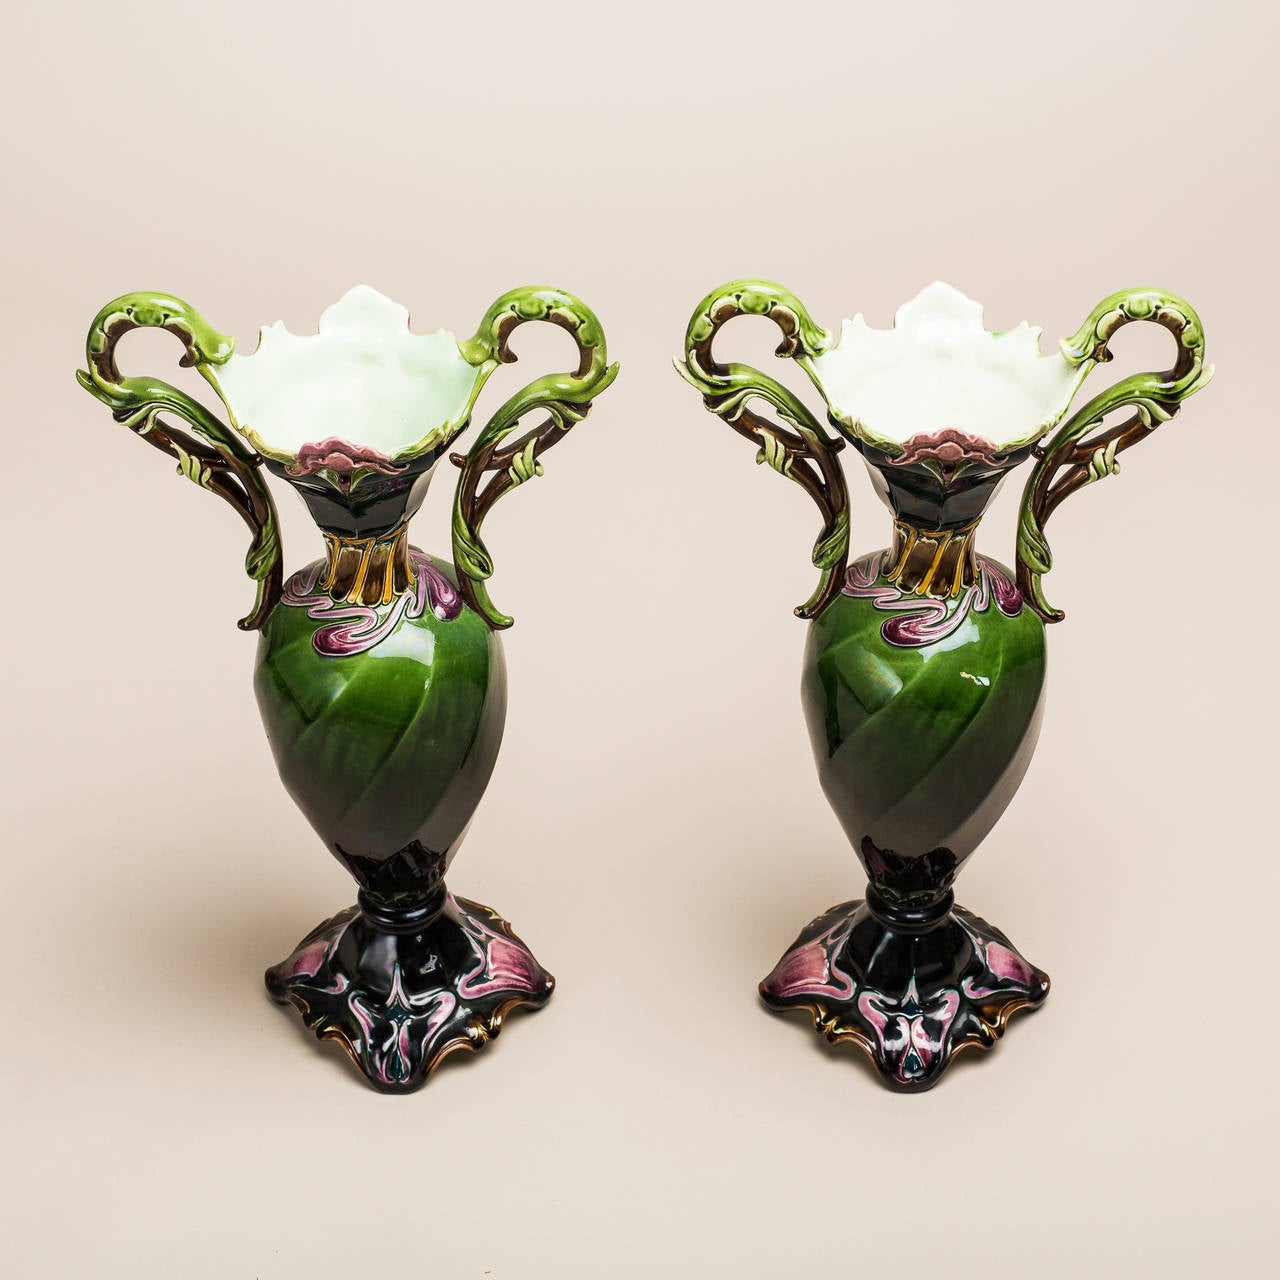 Julius Dressler is a Bohemian company that is known worldwide for their superior ceramic creations. These gorgeous Art Nouveau vases have a smooth natural appearance that is accentuated by its floral style. Detailed handles that bring to mind a